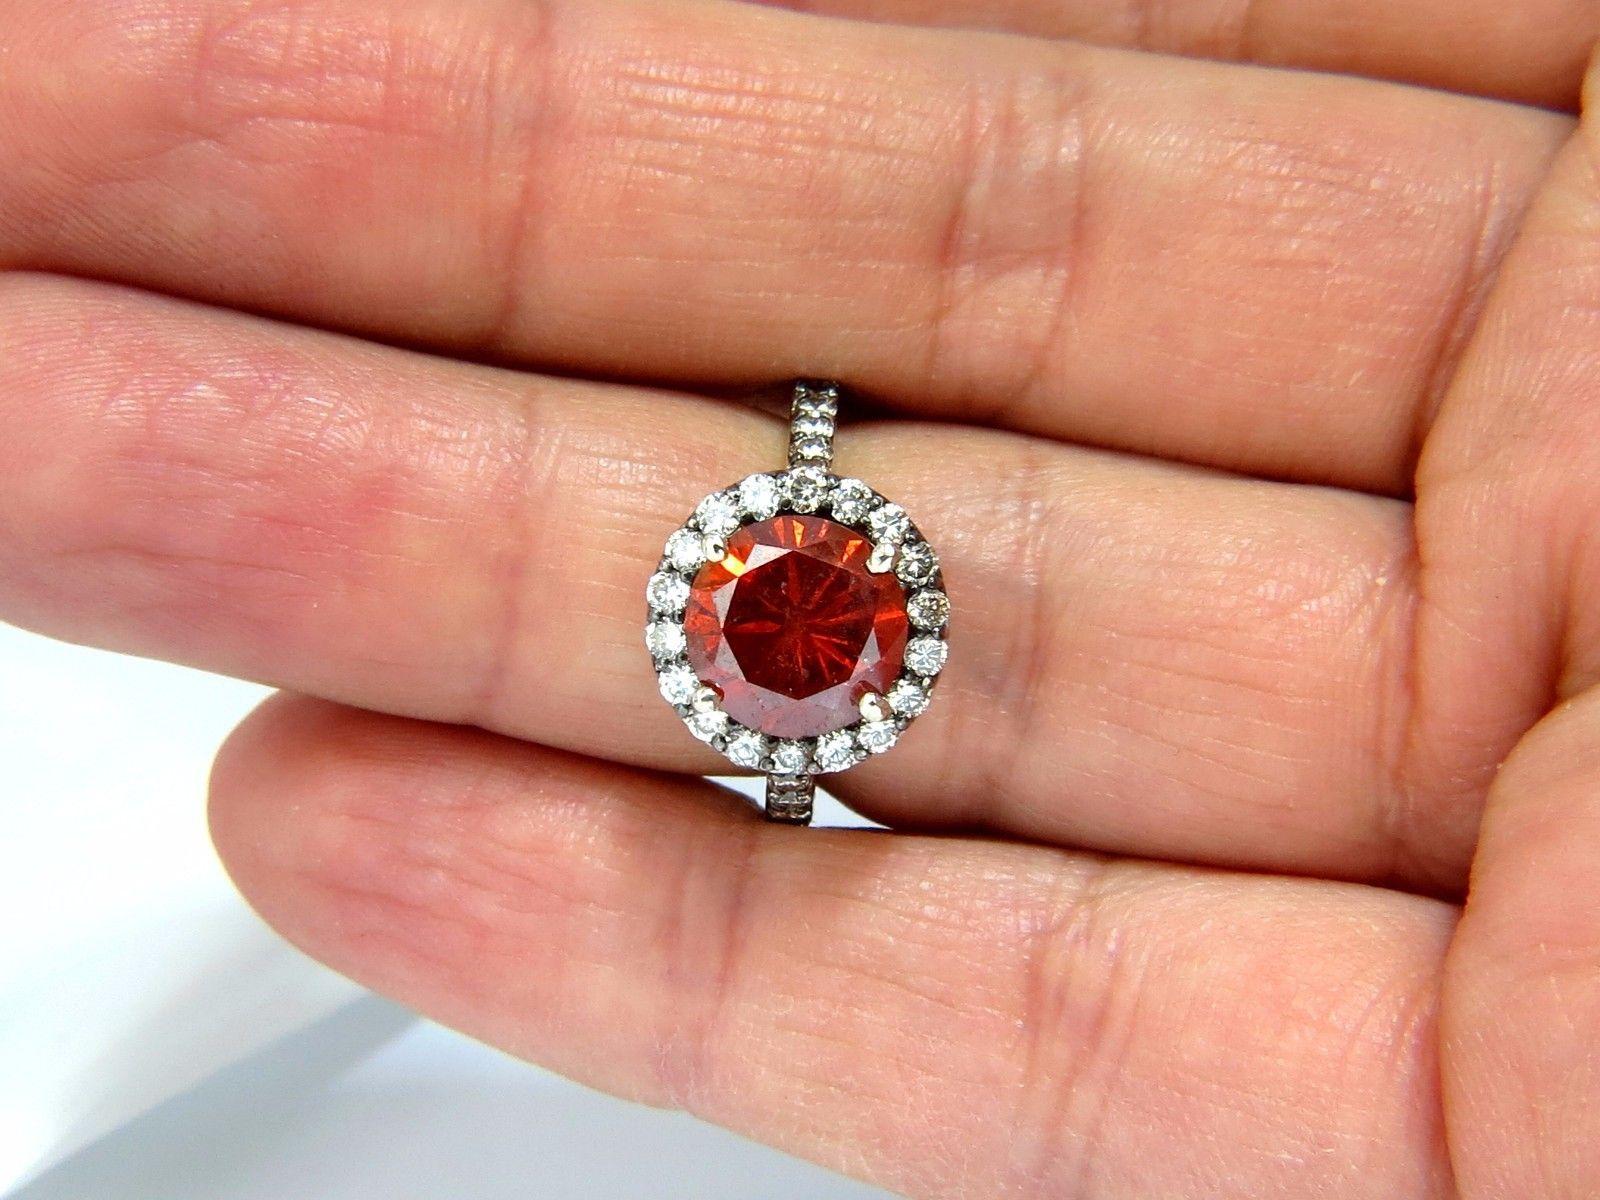 The Vivid Orange Red.

3.45ct. round brilliant natural diamond ring.

Center Diamonds has been coated Orange Red Color.

Round, Full cut brilliant

No Further enhancements.

I-1 Clarity.

9.65mm diameter.



Side Round Diamonds:

Natural Fancy